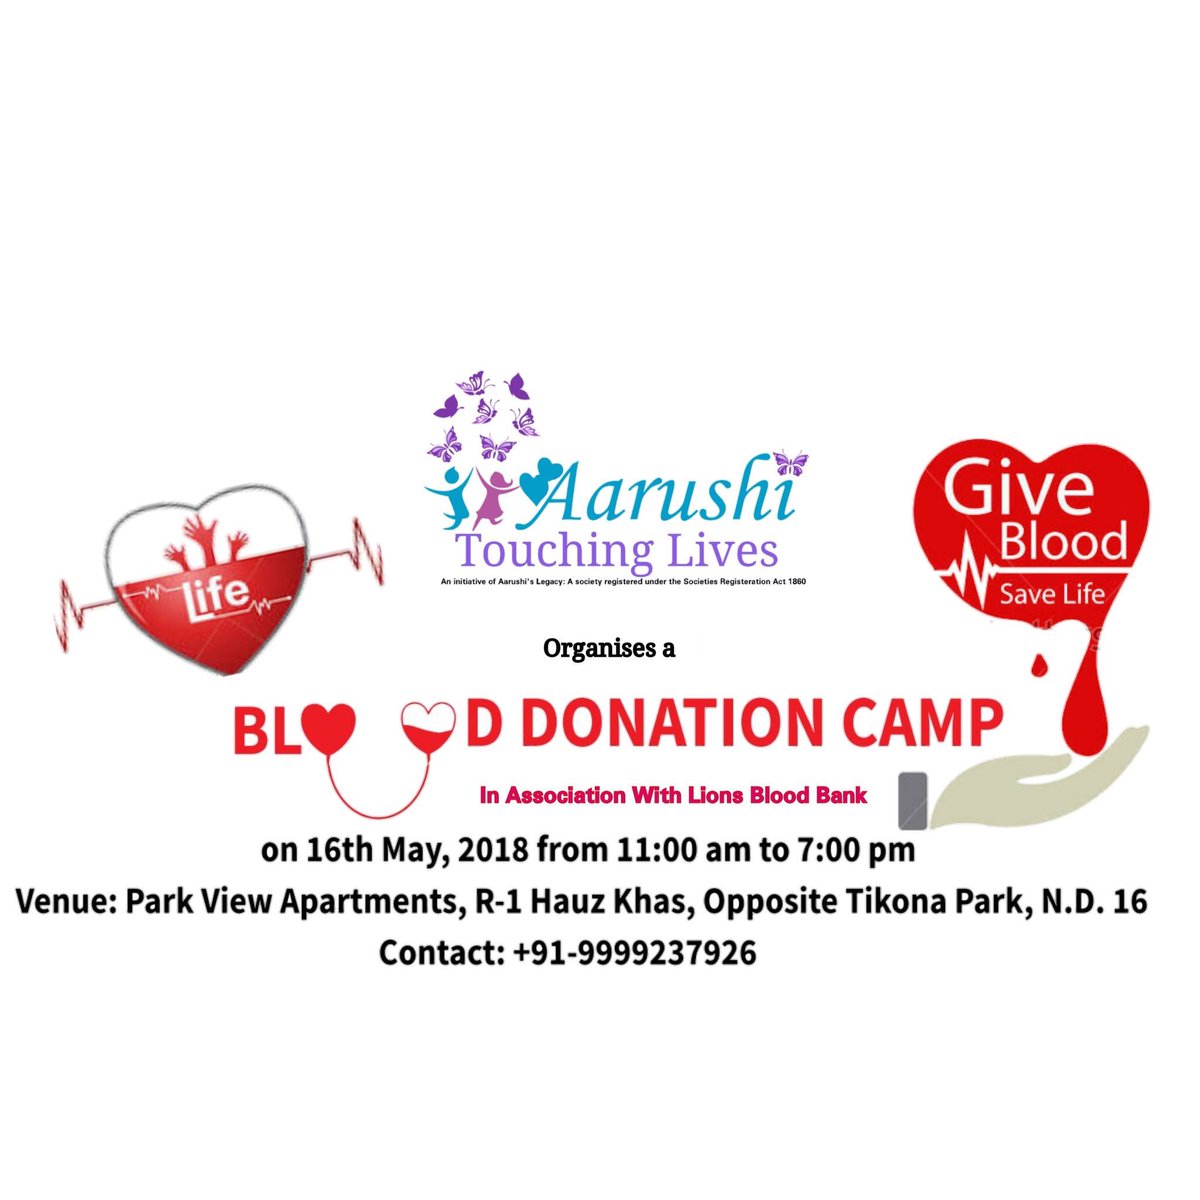 'Blood Donation will cost you nothing but will save a life ' #Aarushi: Touching lives is organising a Blood Donation Camp in association with @lionsbloodbanks, as a tribute to her. Please join in to support the cause and pray for the peace for her soul on 16.5.2018 Please RT